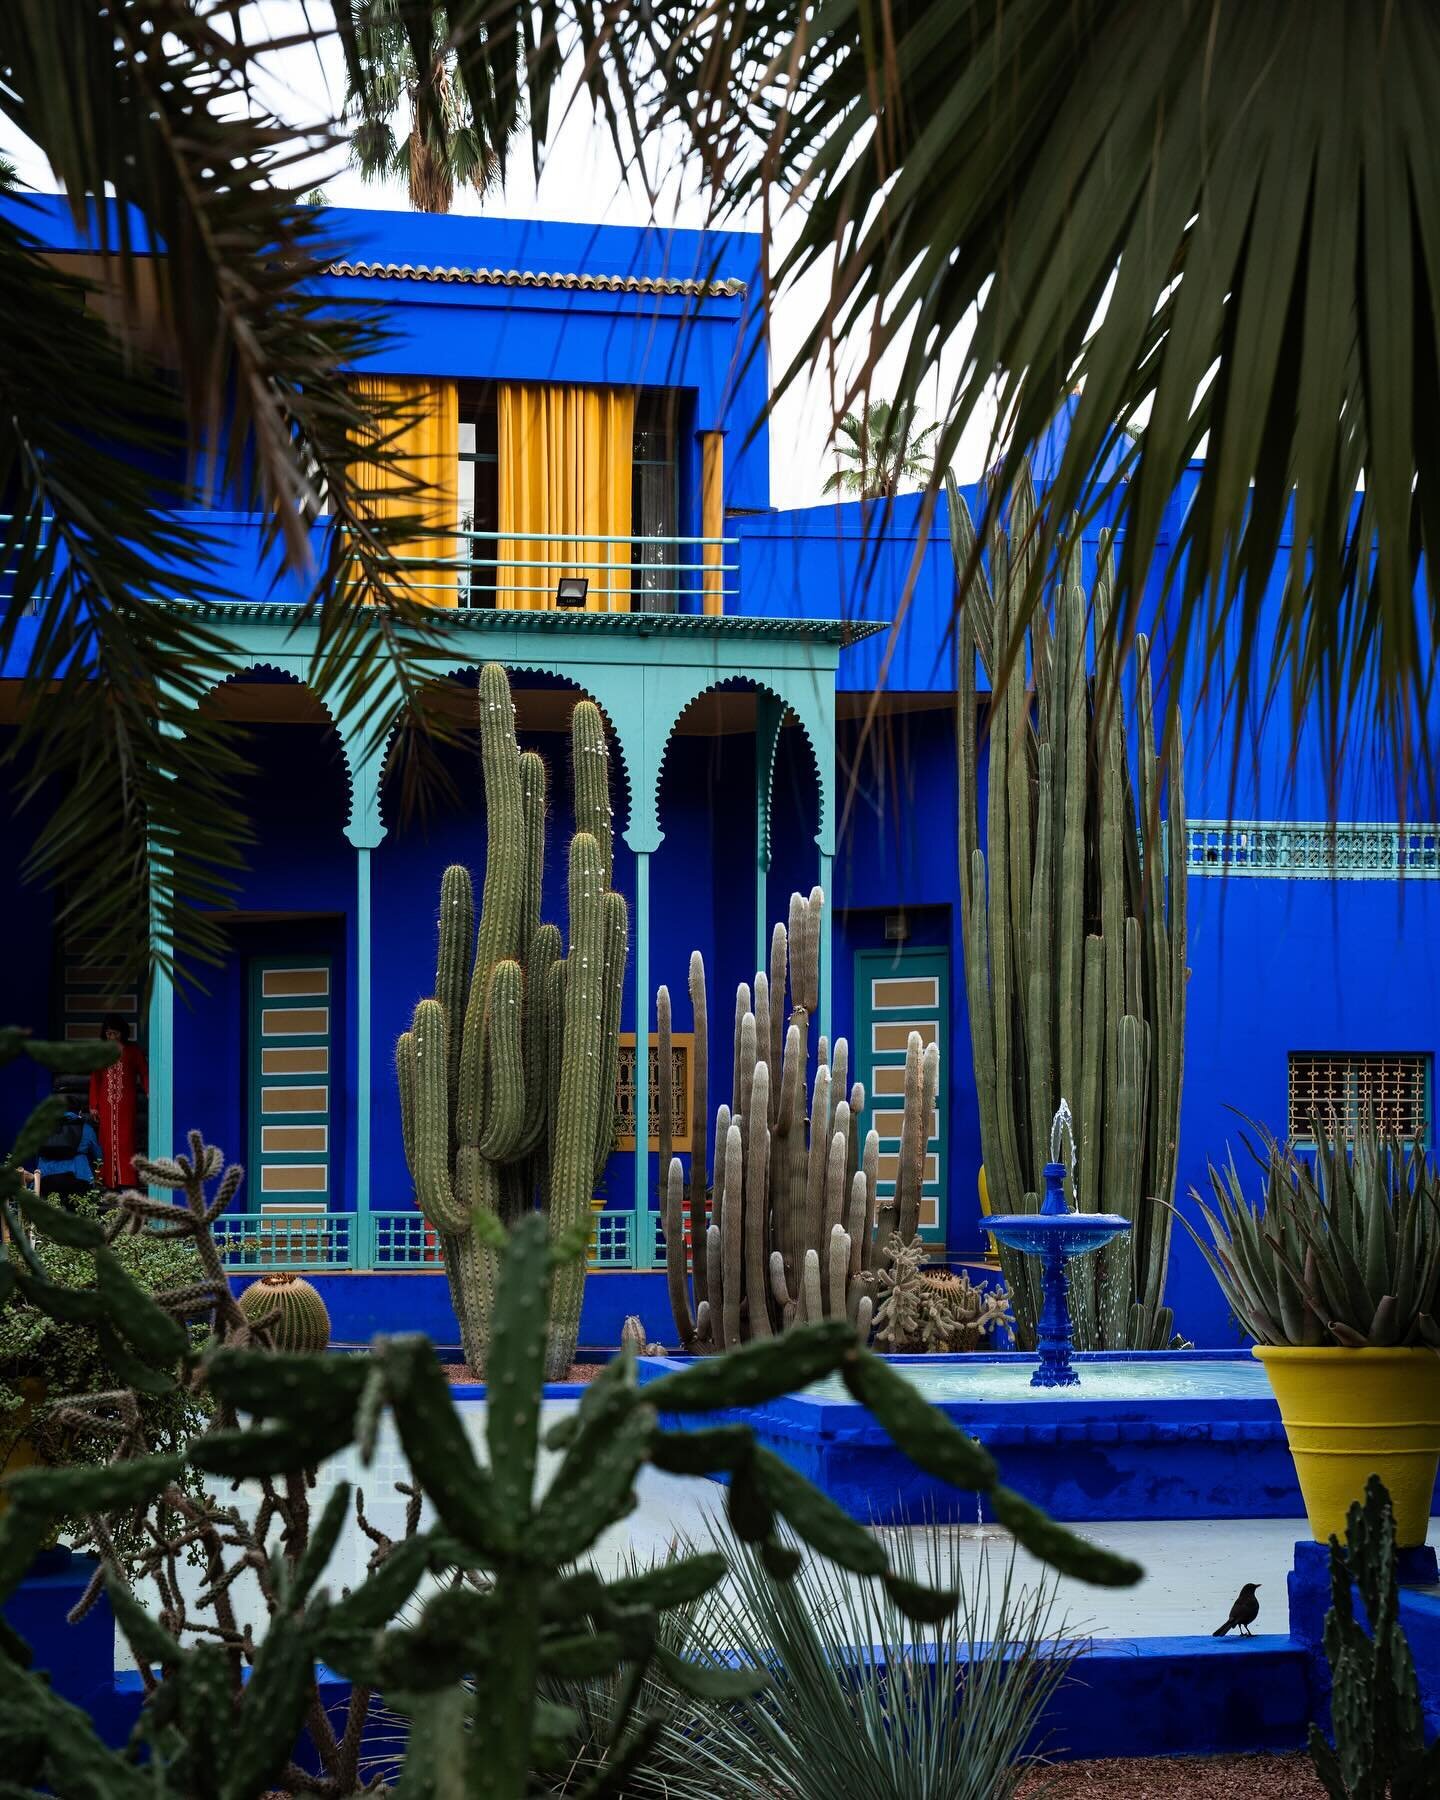 Jardin Majorelle is a sight to behold 💙 the colors, the perfectly manicured gardens, and the diversity of plants are exceptional 

@jardinmajorellemarrakech shot for @soleyogaholidays 📷 

#jardinmajorelle #marrakech #ysl #morocco #travelphotographe